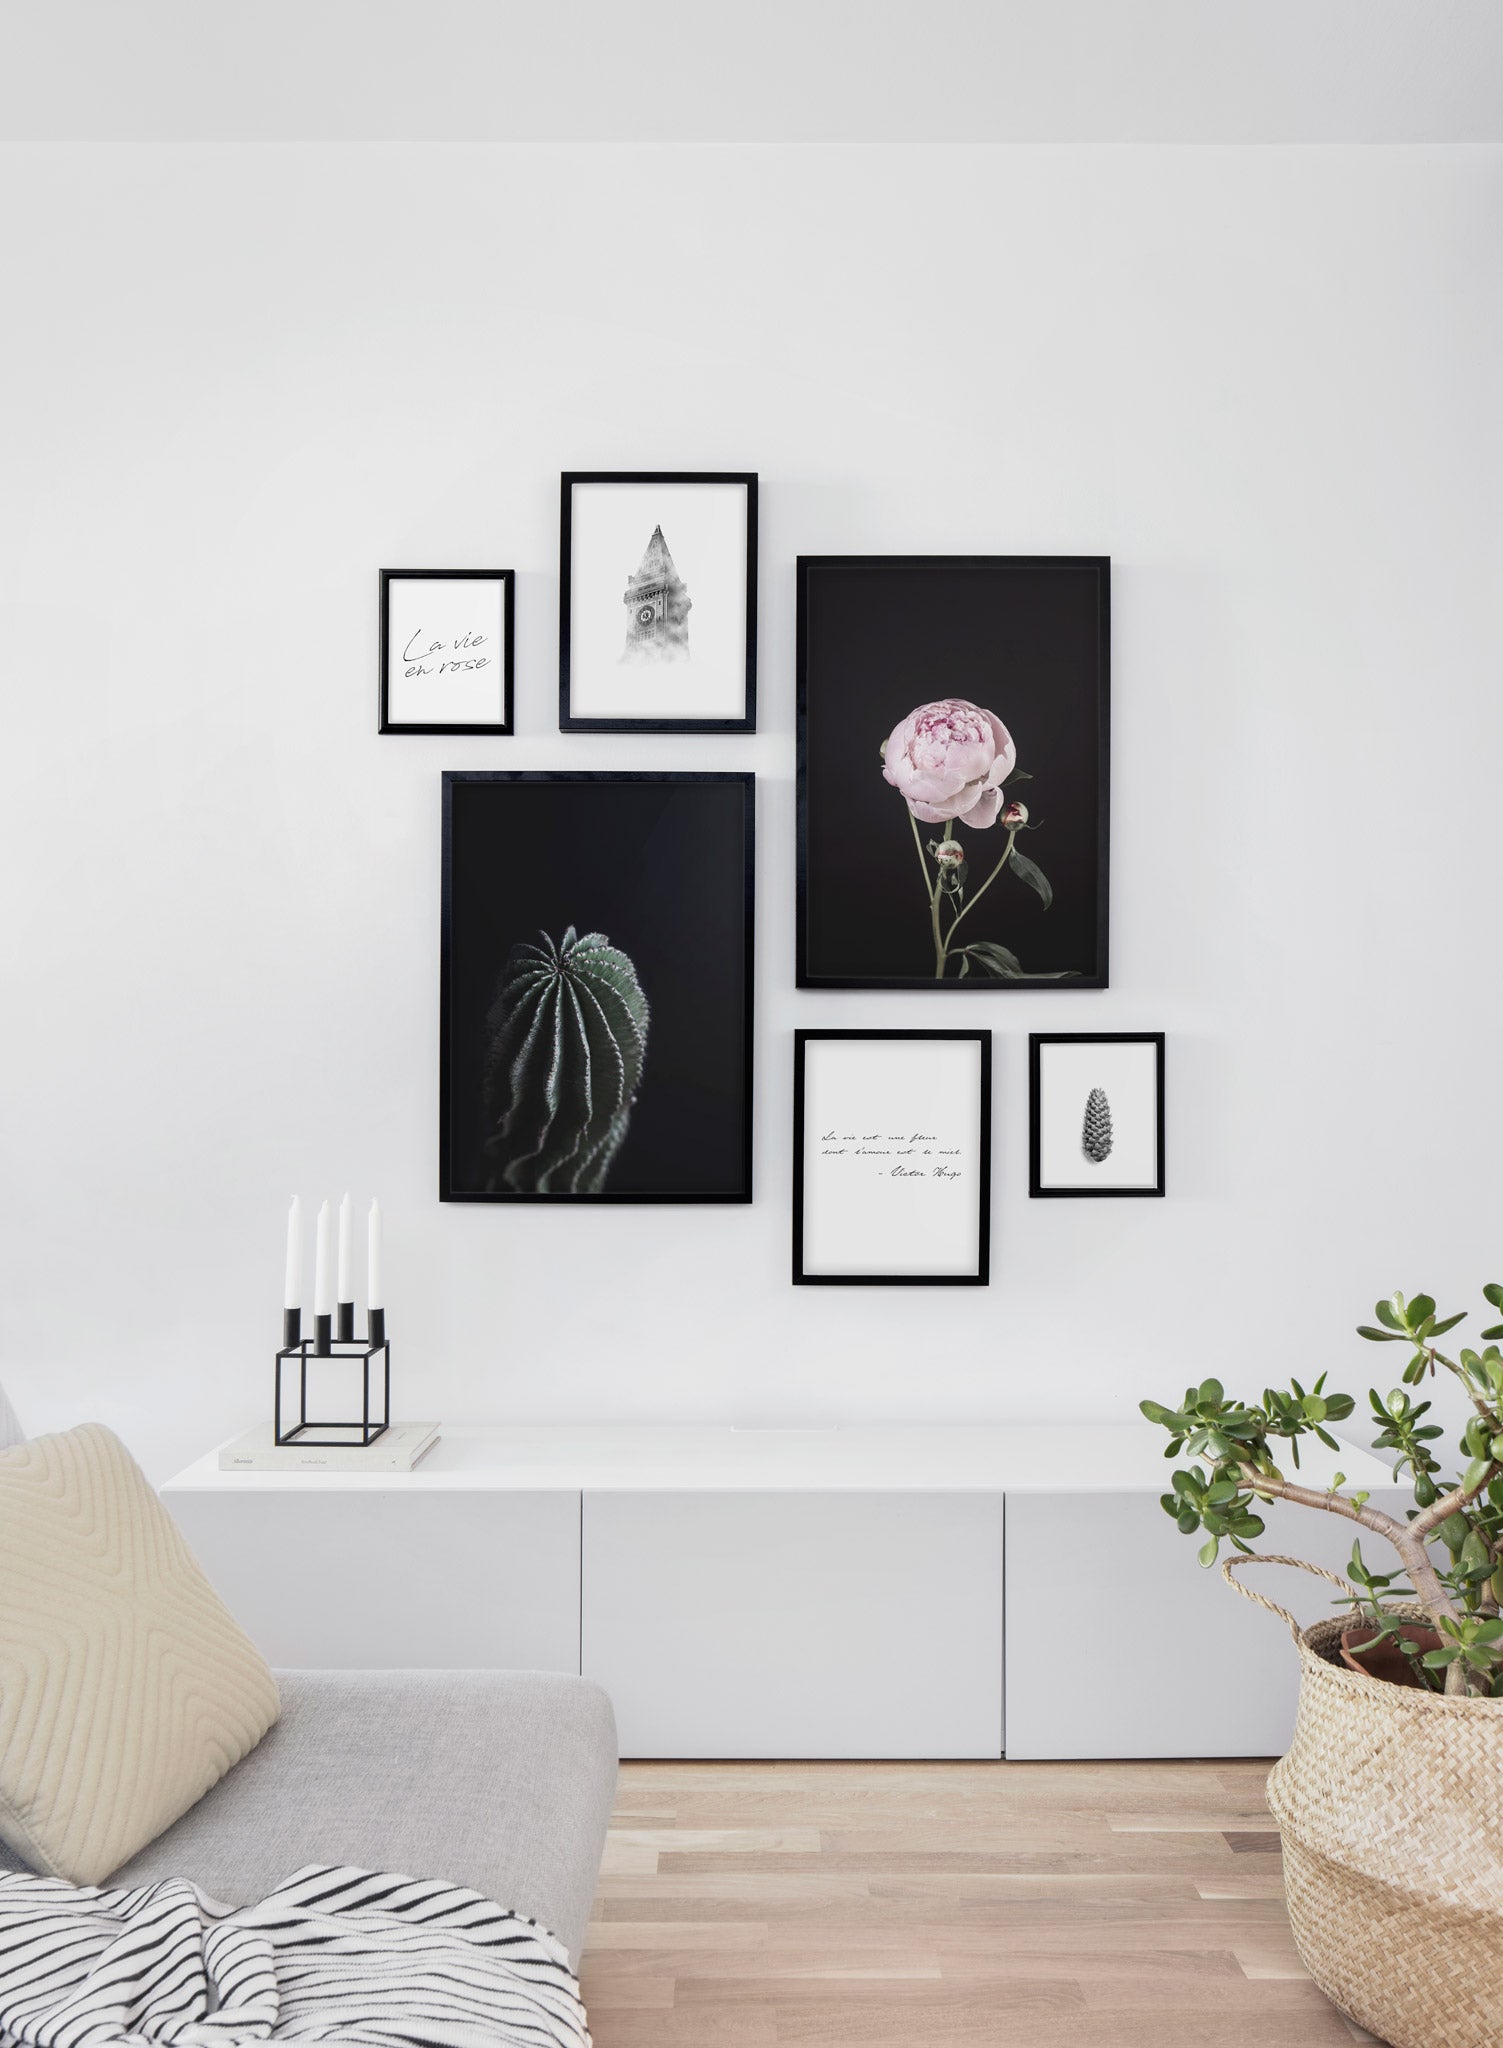 Modern minimalist poster by Opposite Wall with Shadows photo art - Living room wall gallery